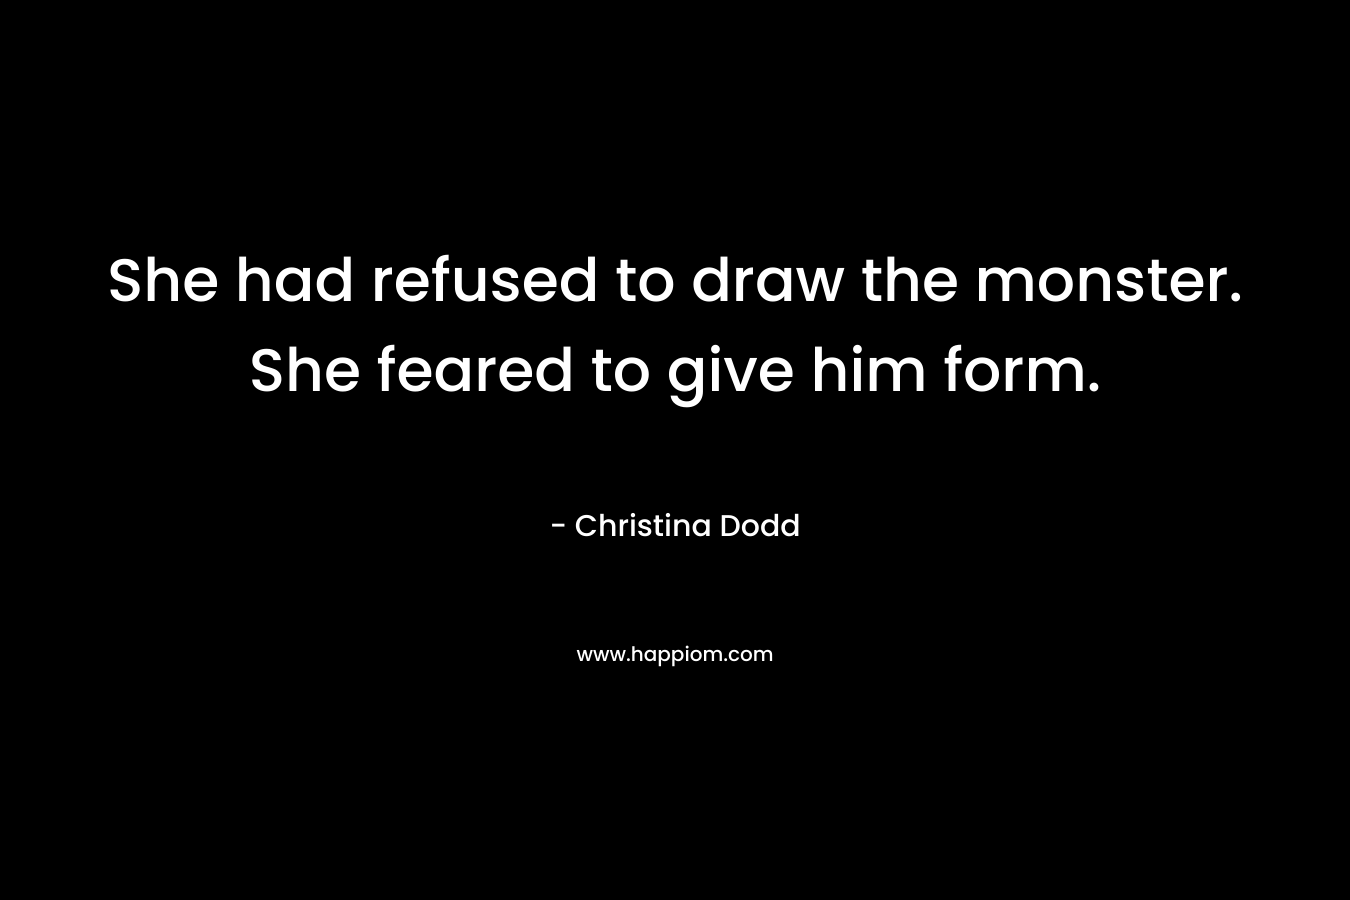 She had refused to draw the monster. She feared to give him form.